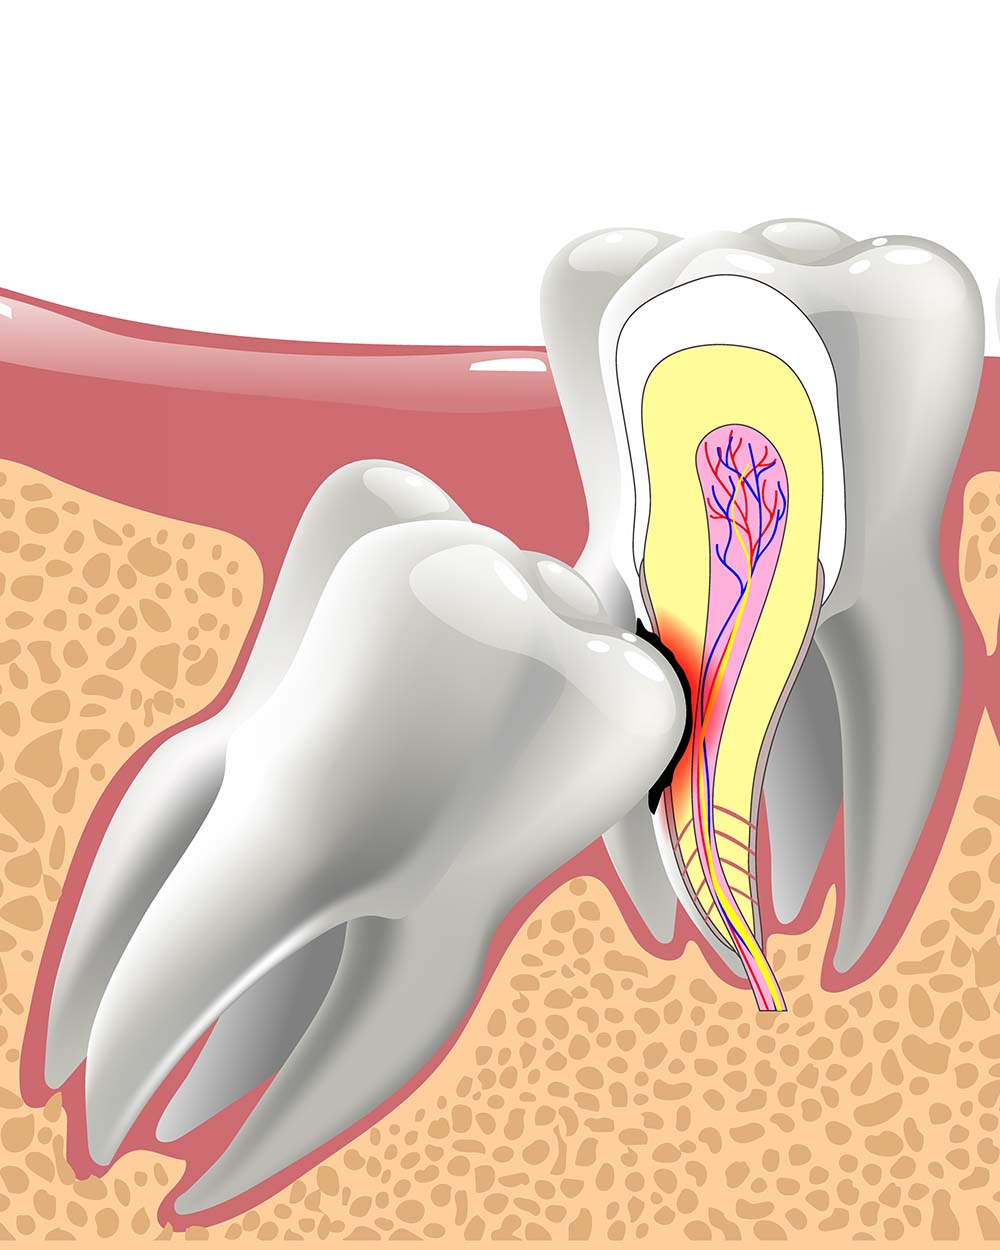 A graphic representation of an impacted wisdom tooth and nerves.